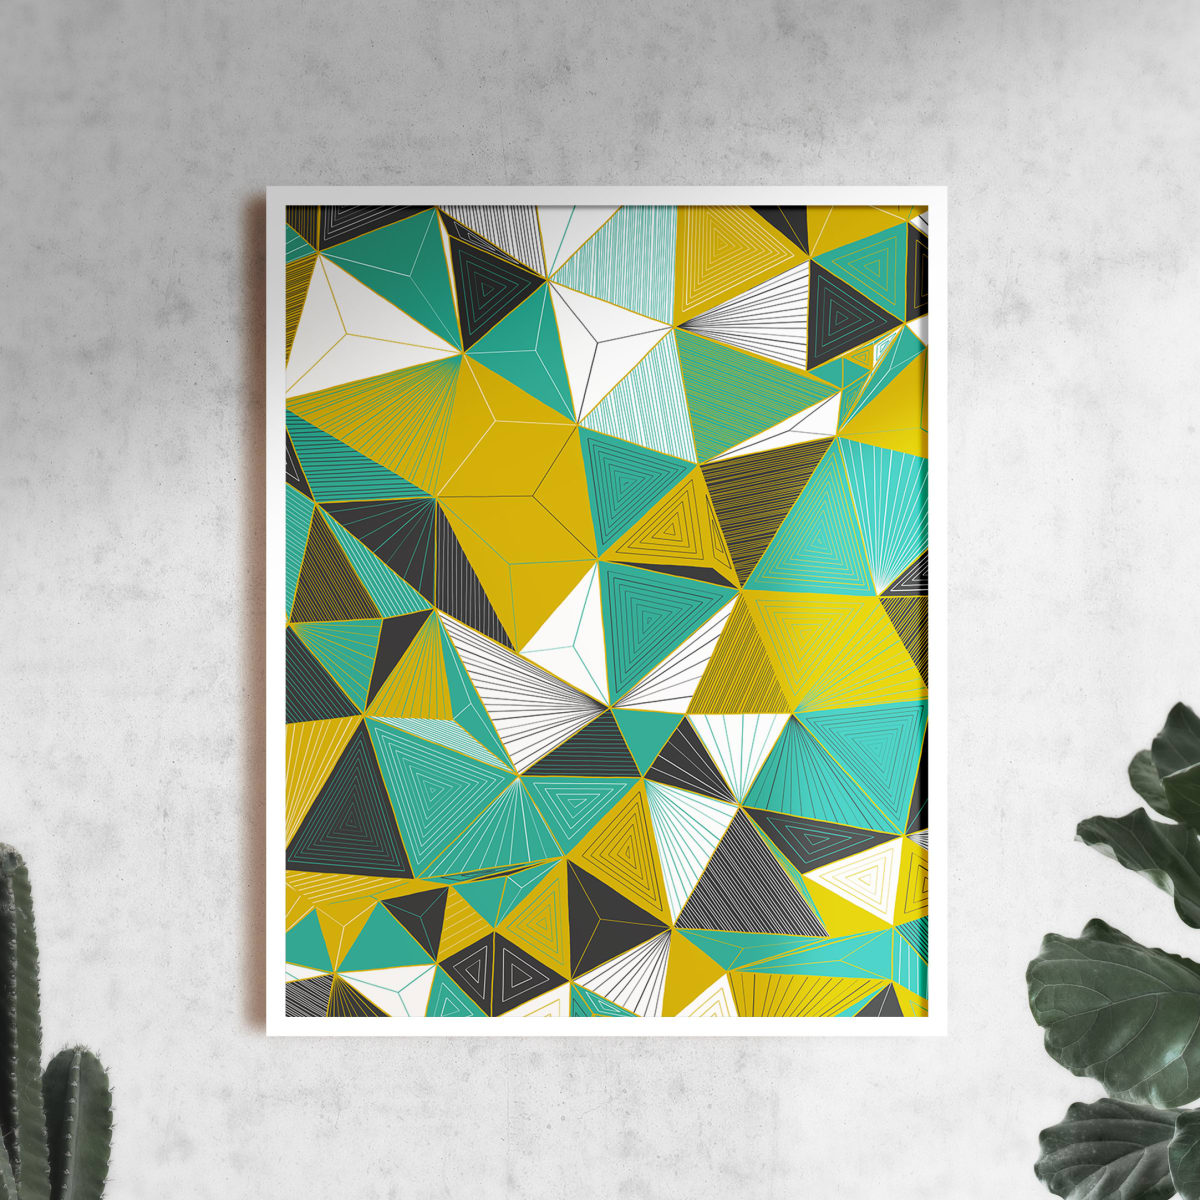 "Conscious Growth 072" Large One-of-a-Kind Print by Debbie Clapper  Image: Conscious Growth Print 072, a green, yellow, black and white one of a kind archival modern art print